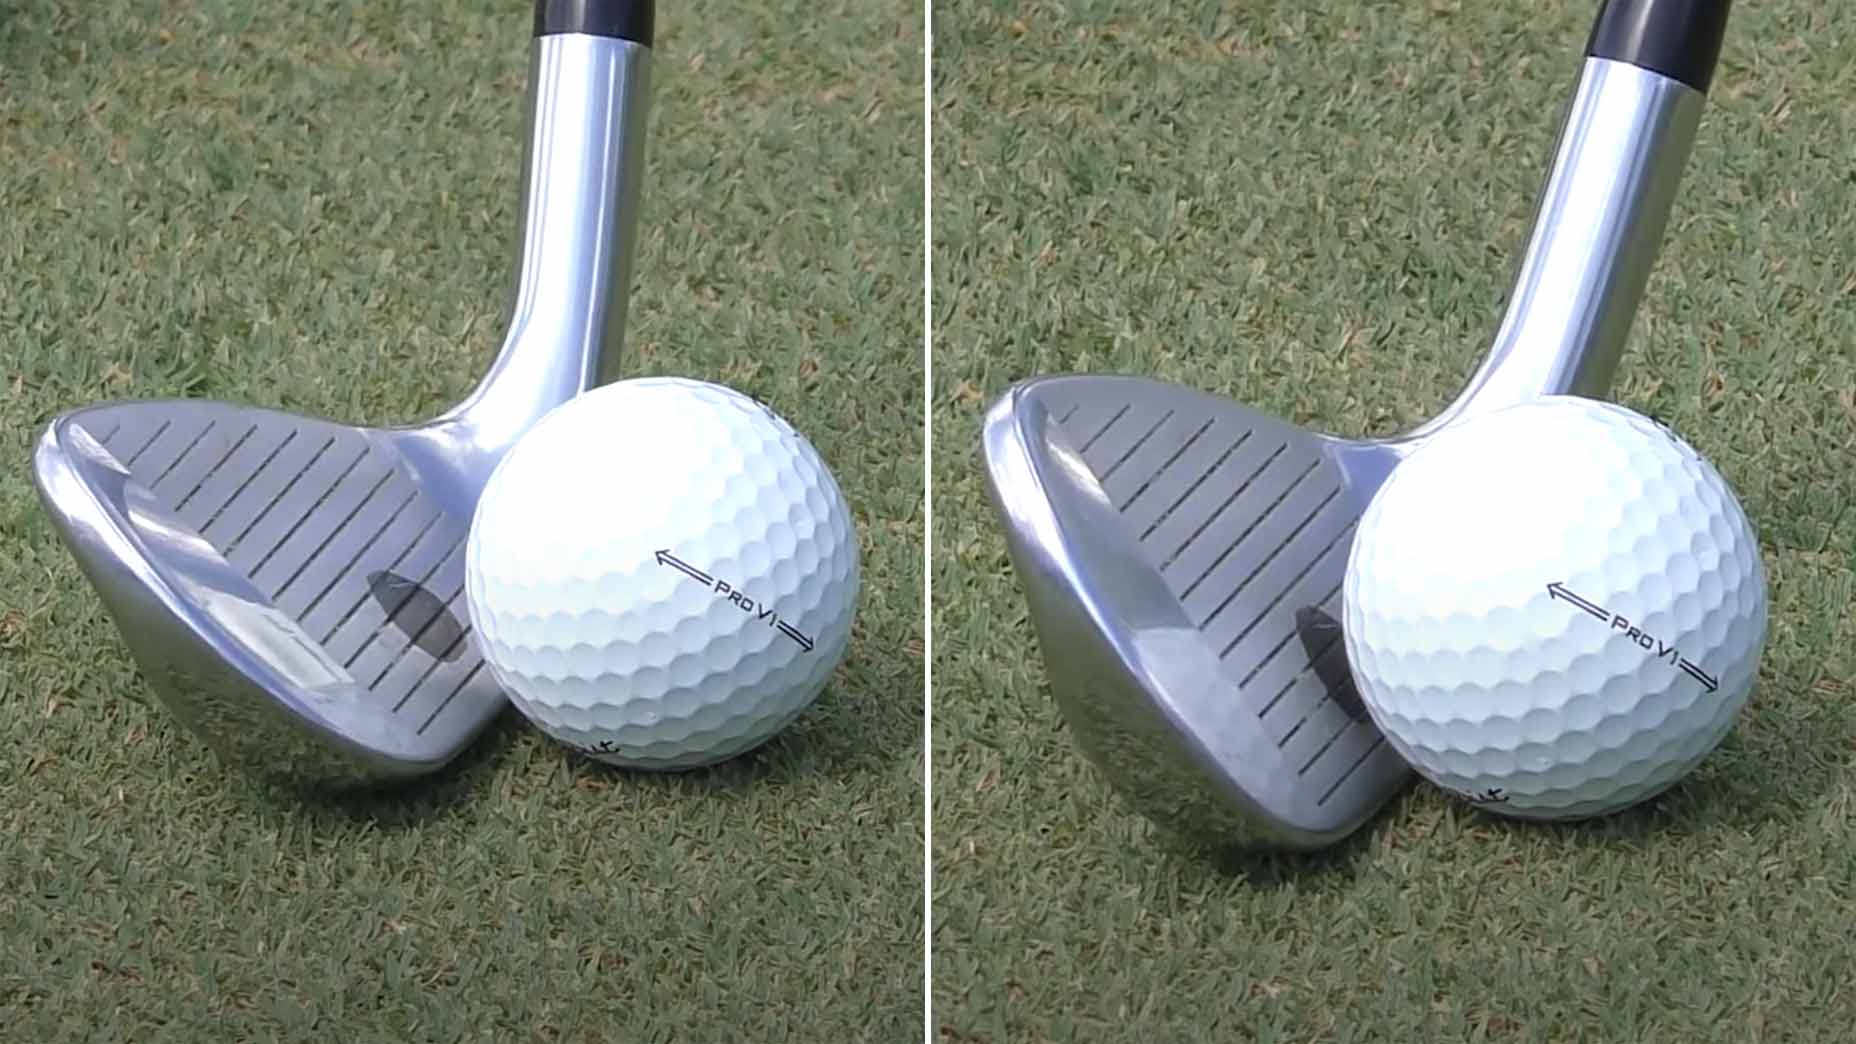 wedge next to a ball with no shaft lean vs. wedge next to ball with ample shaft lean